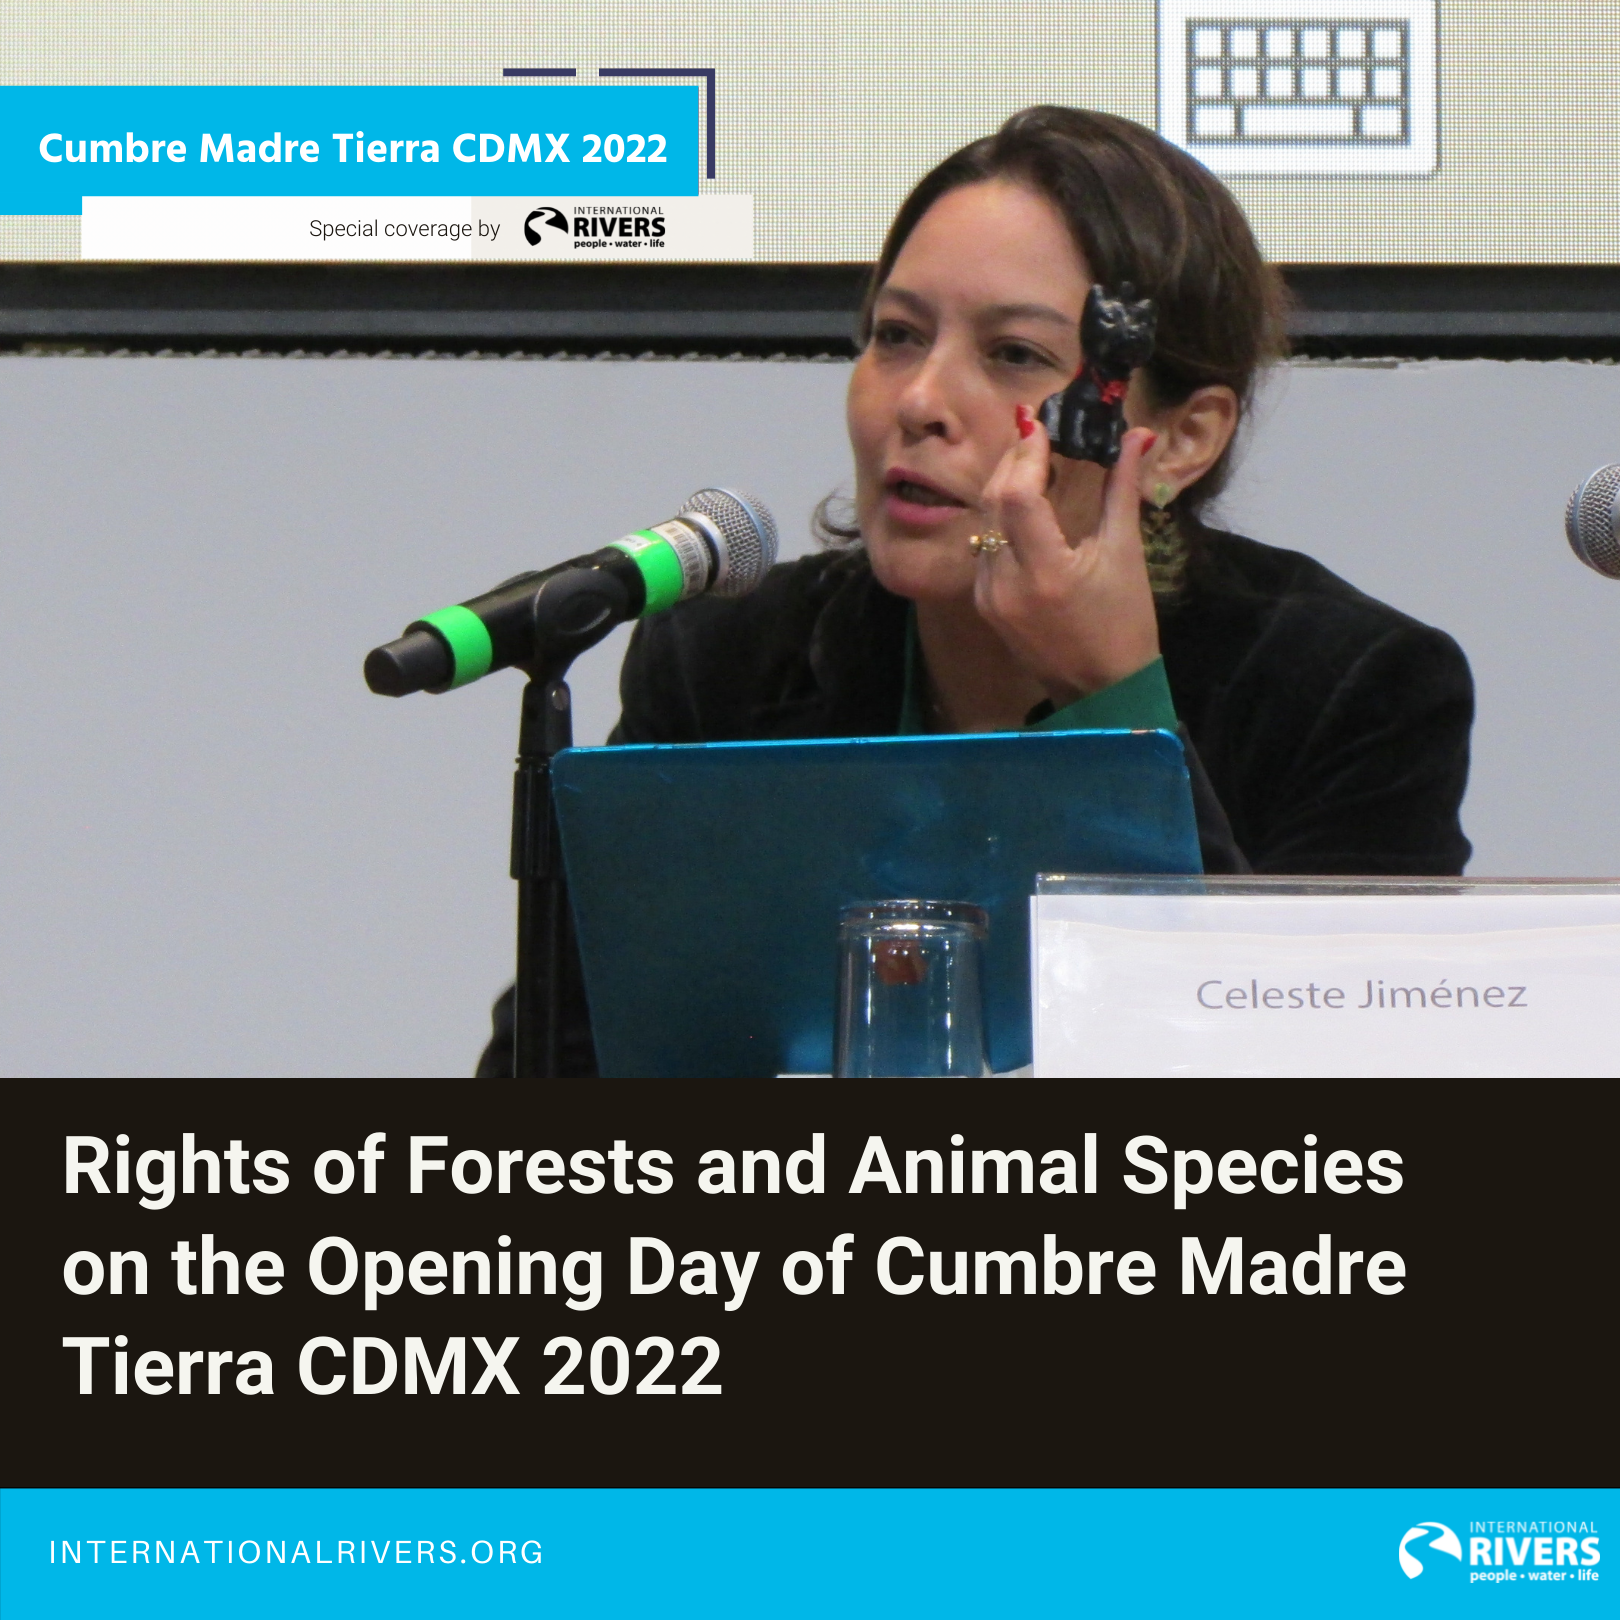 Rights of Forests and Animals Species on the Opening Day of Cumbre Madre Tierra CDMX 2022